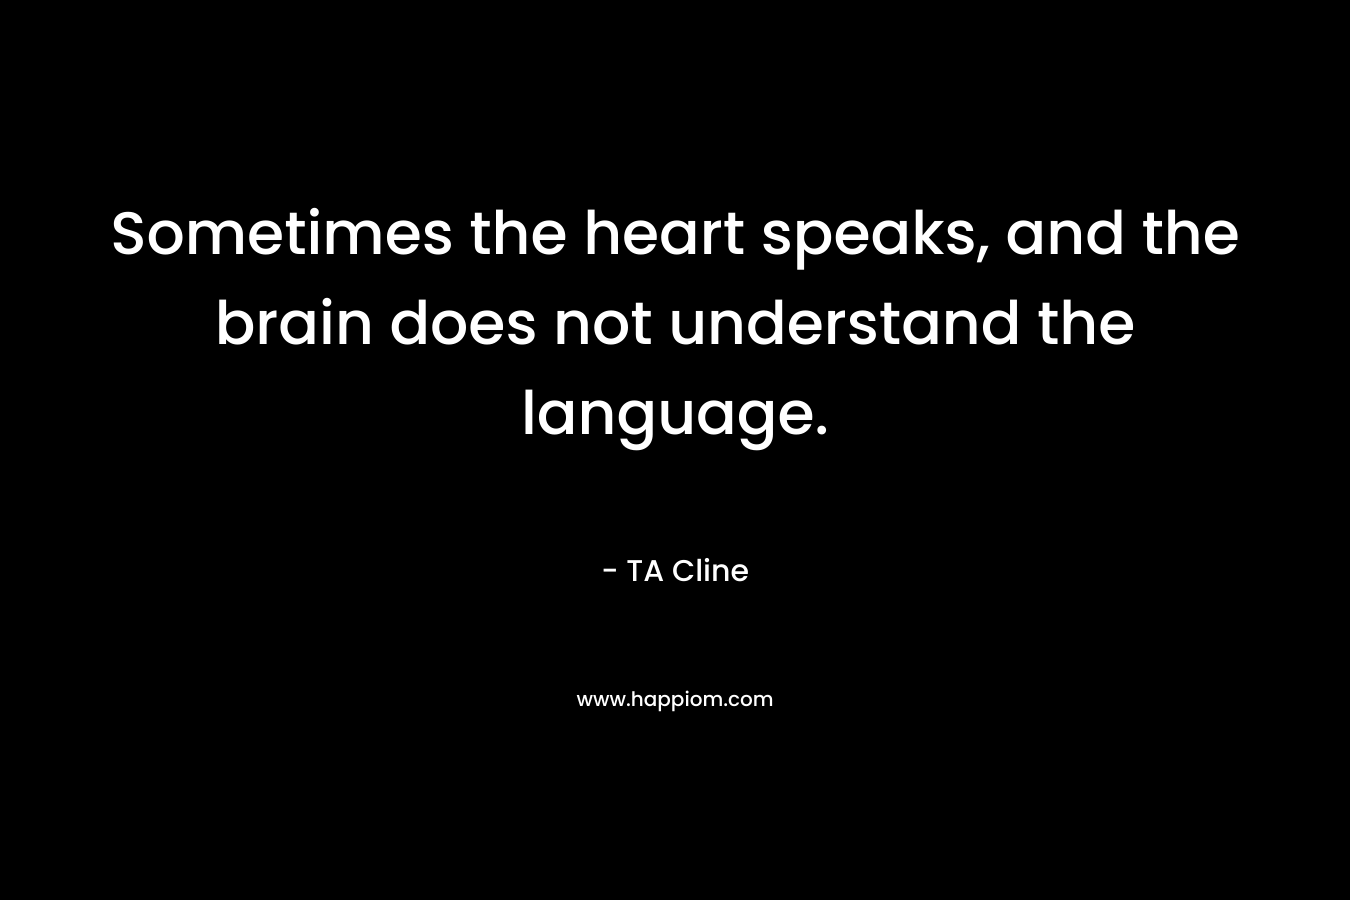 Sometimes the heart speaks, and the brain does not understand the language. – TA Cline